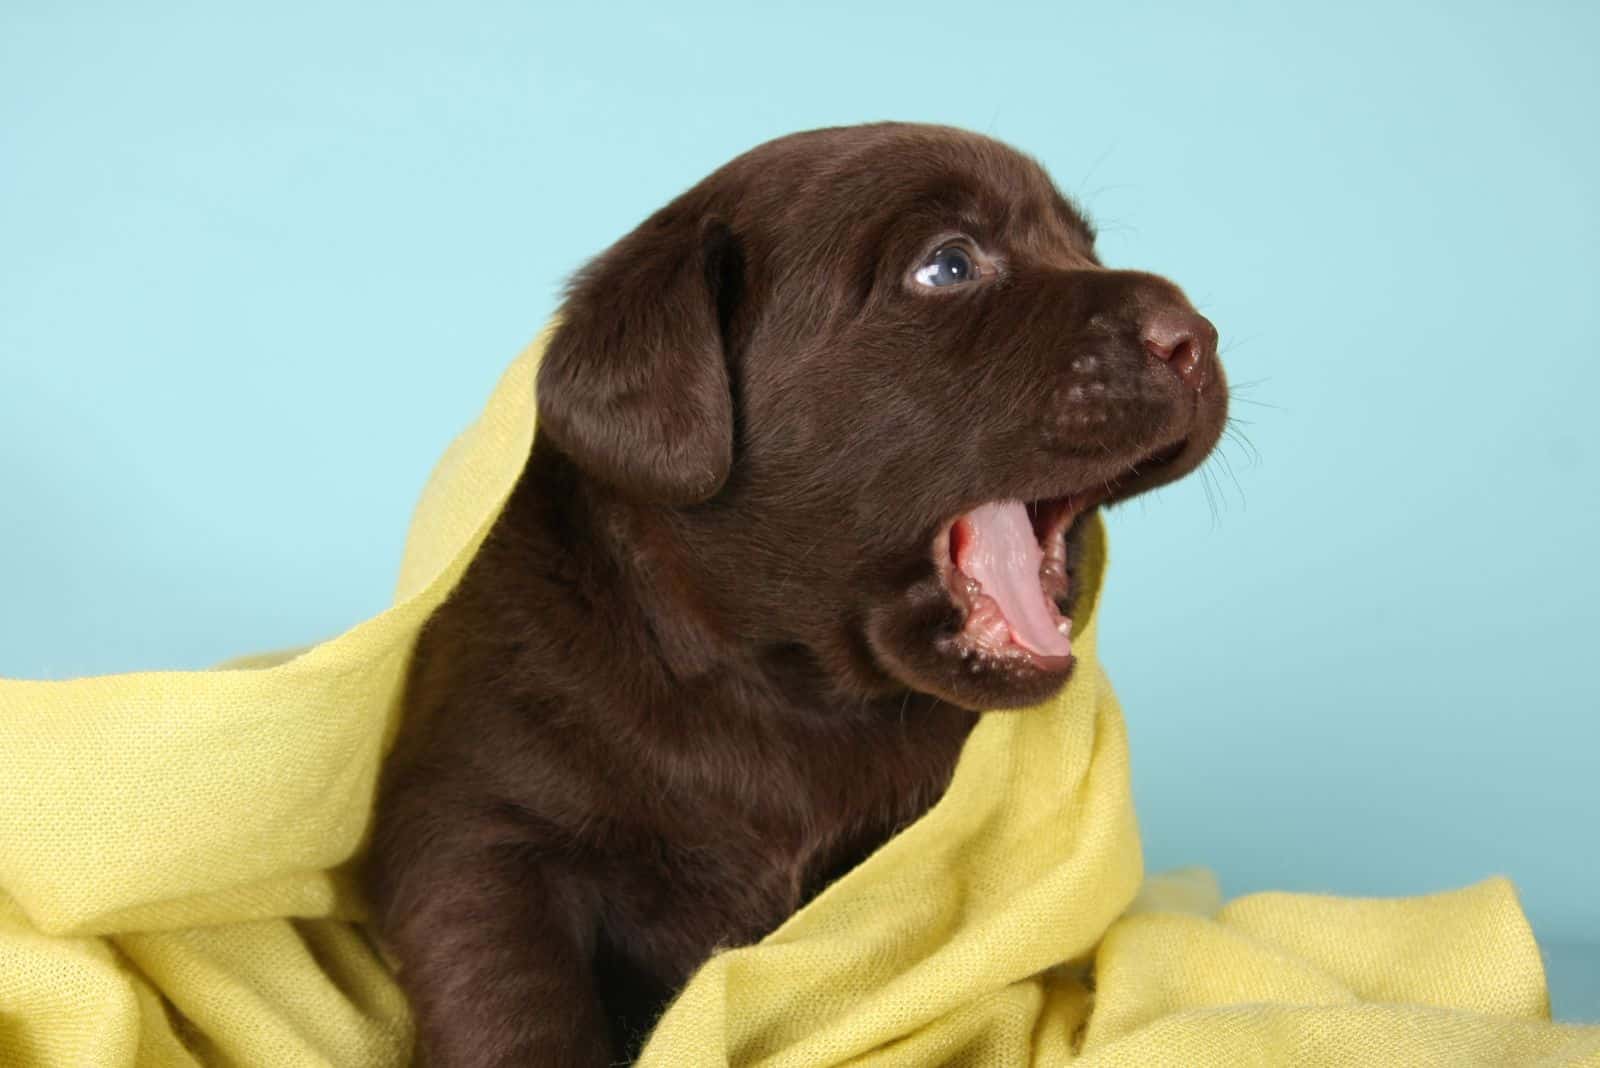 8 Puppy Teething Symptoms Every Dog Owner Should Know